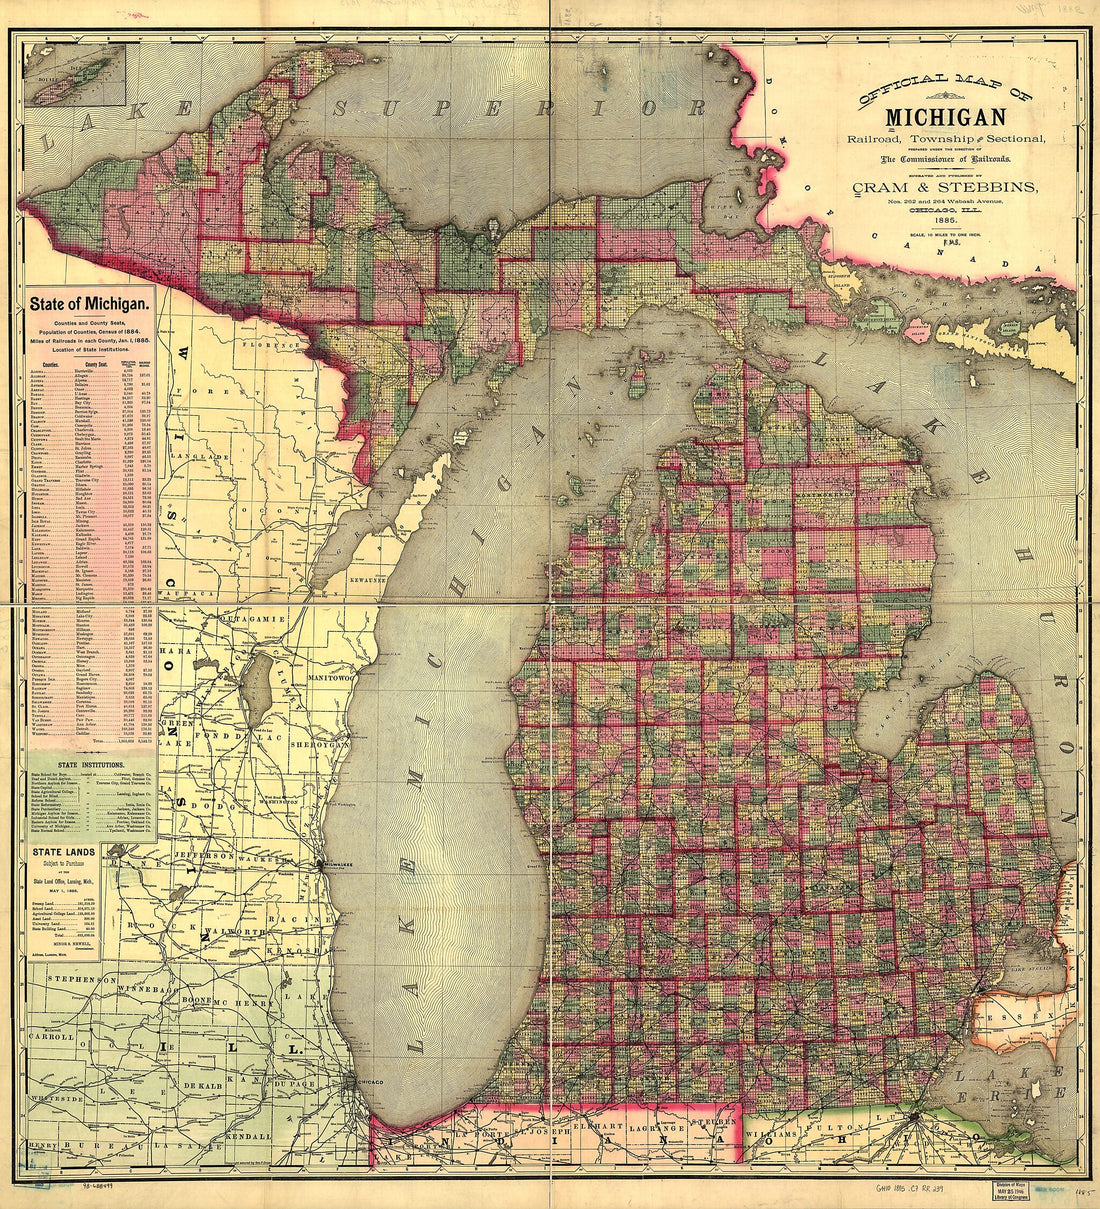 This old map of Official Map of Michigan, Railroad, Township and Sectional, Prepared Under the Direction of the Commissioner of Railroads from 1885 was created by  Cram &amp; Stebbins in 1885